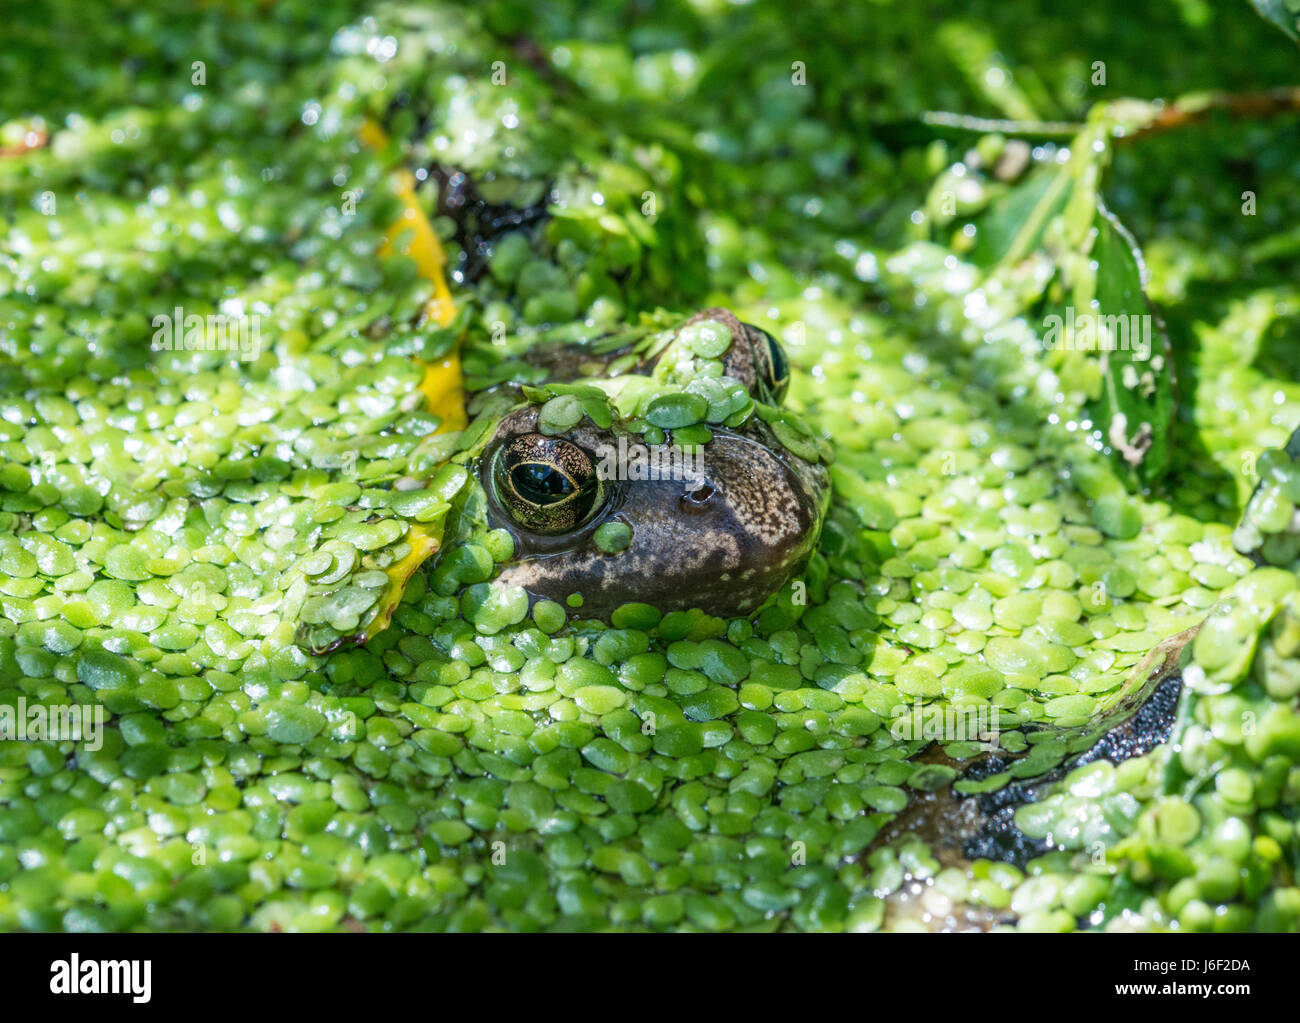 Froglet poking its head through duckweed in a garden pond Stock Photo